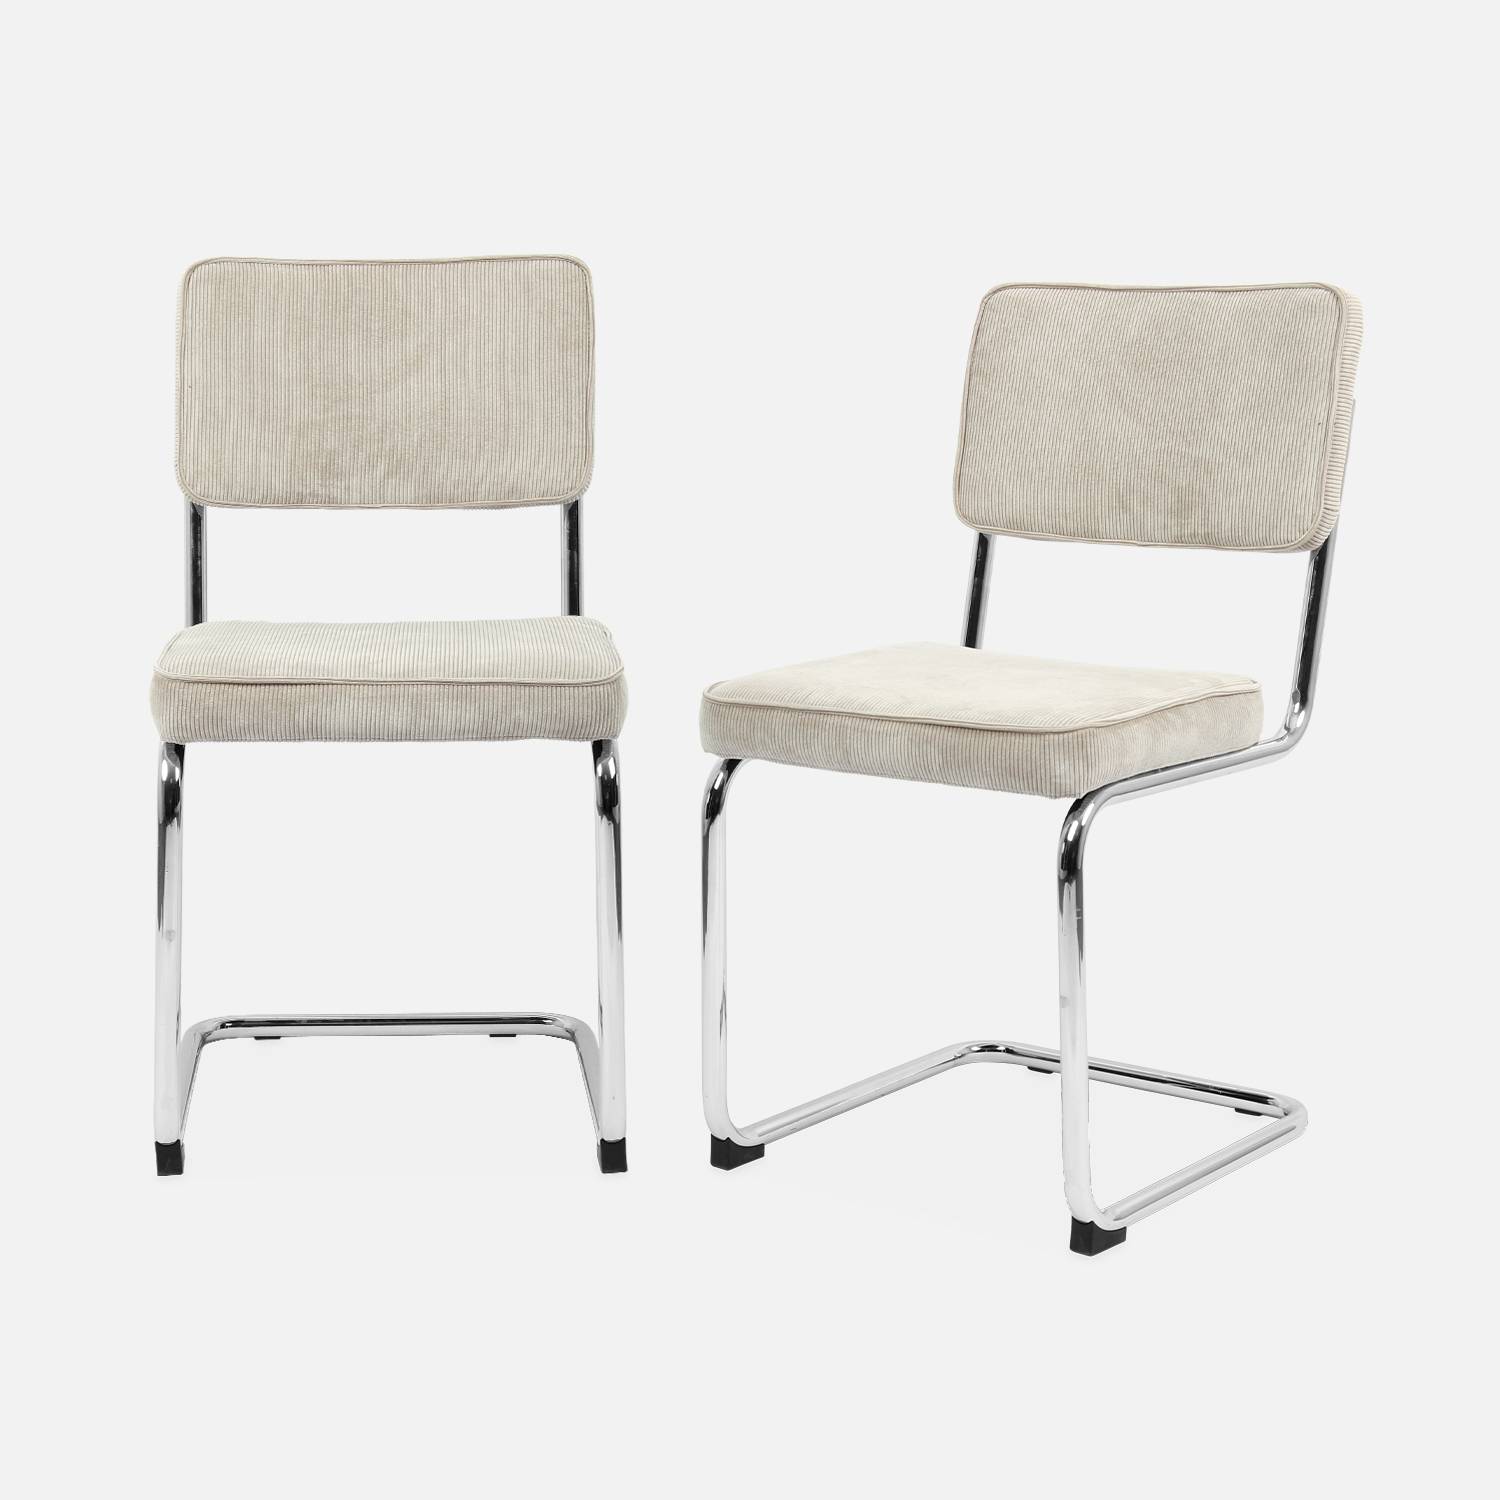 Pair of corduroy cantilever dining chairs, 46x54.5x84.5cm, Grey | sweeek